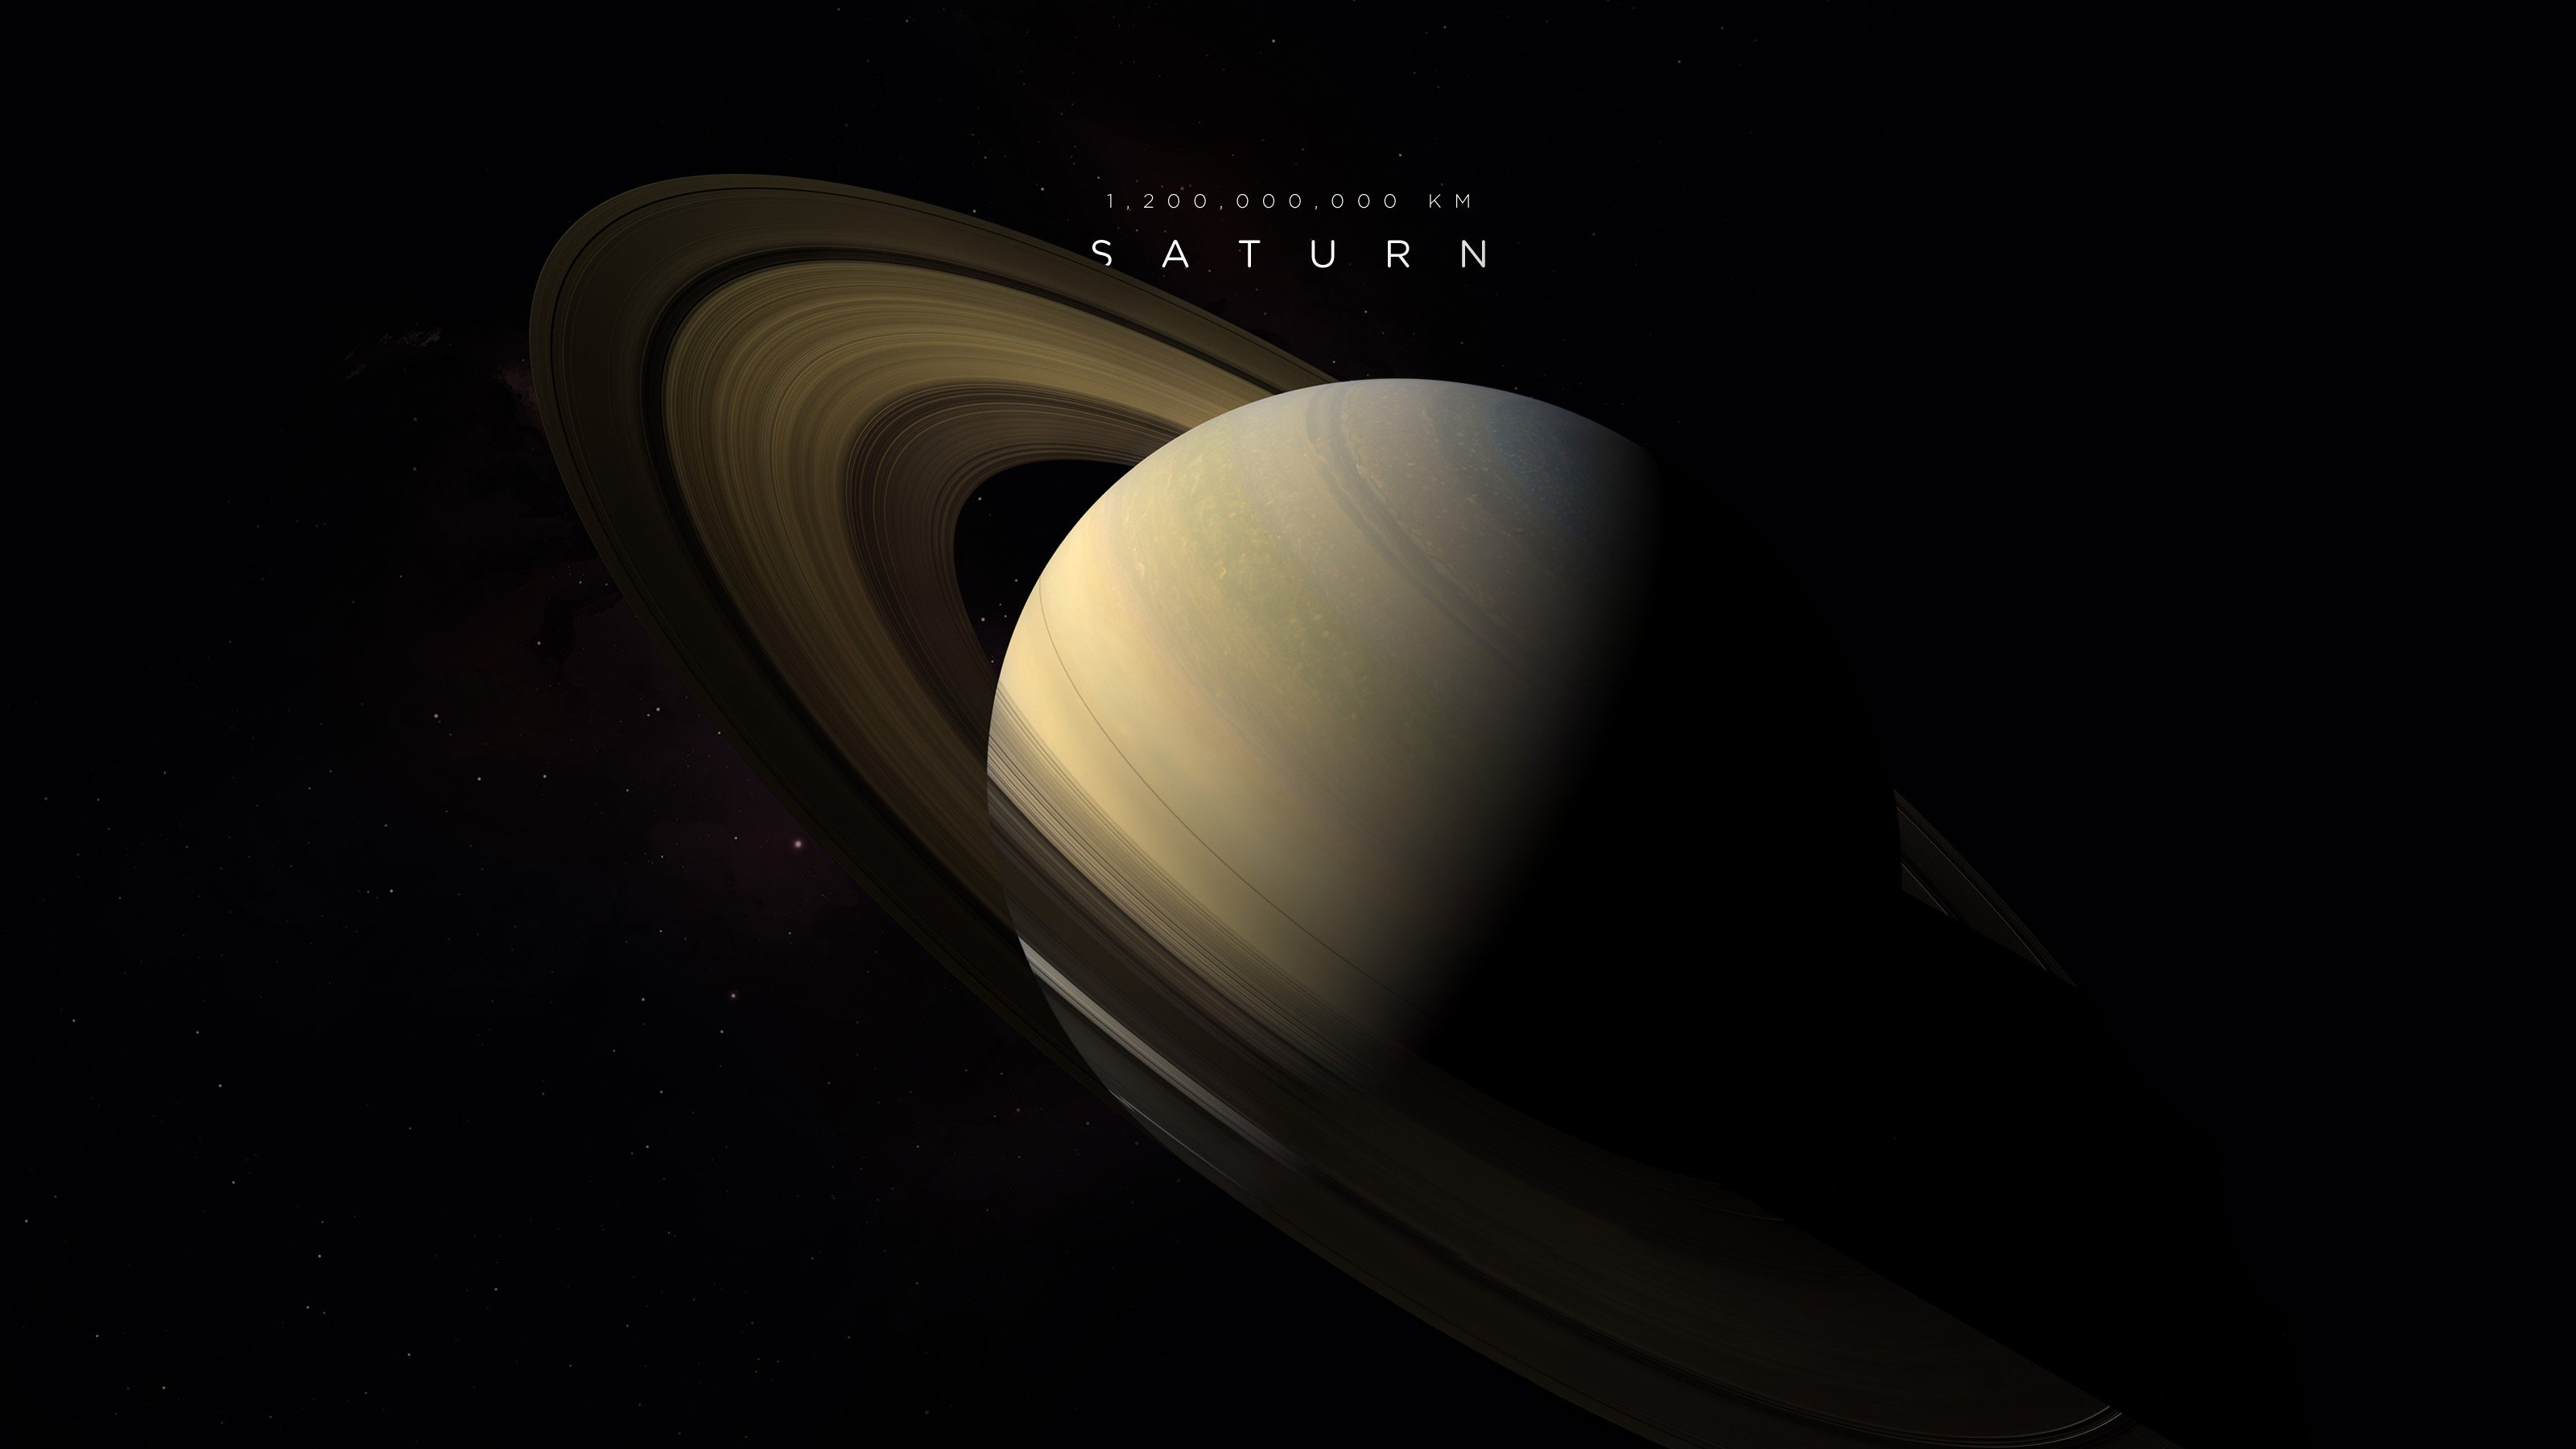 3200x1800 Saturn, Space, Universe, Stars, Planet HD Wallpapers / Desktop and Mobile Images \u0026 Photos